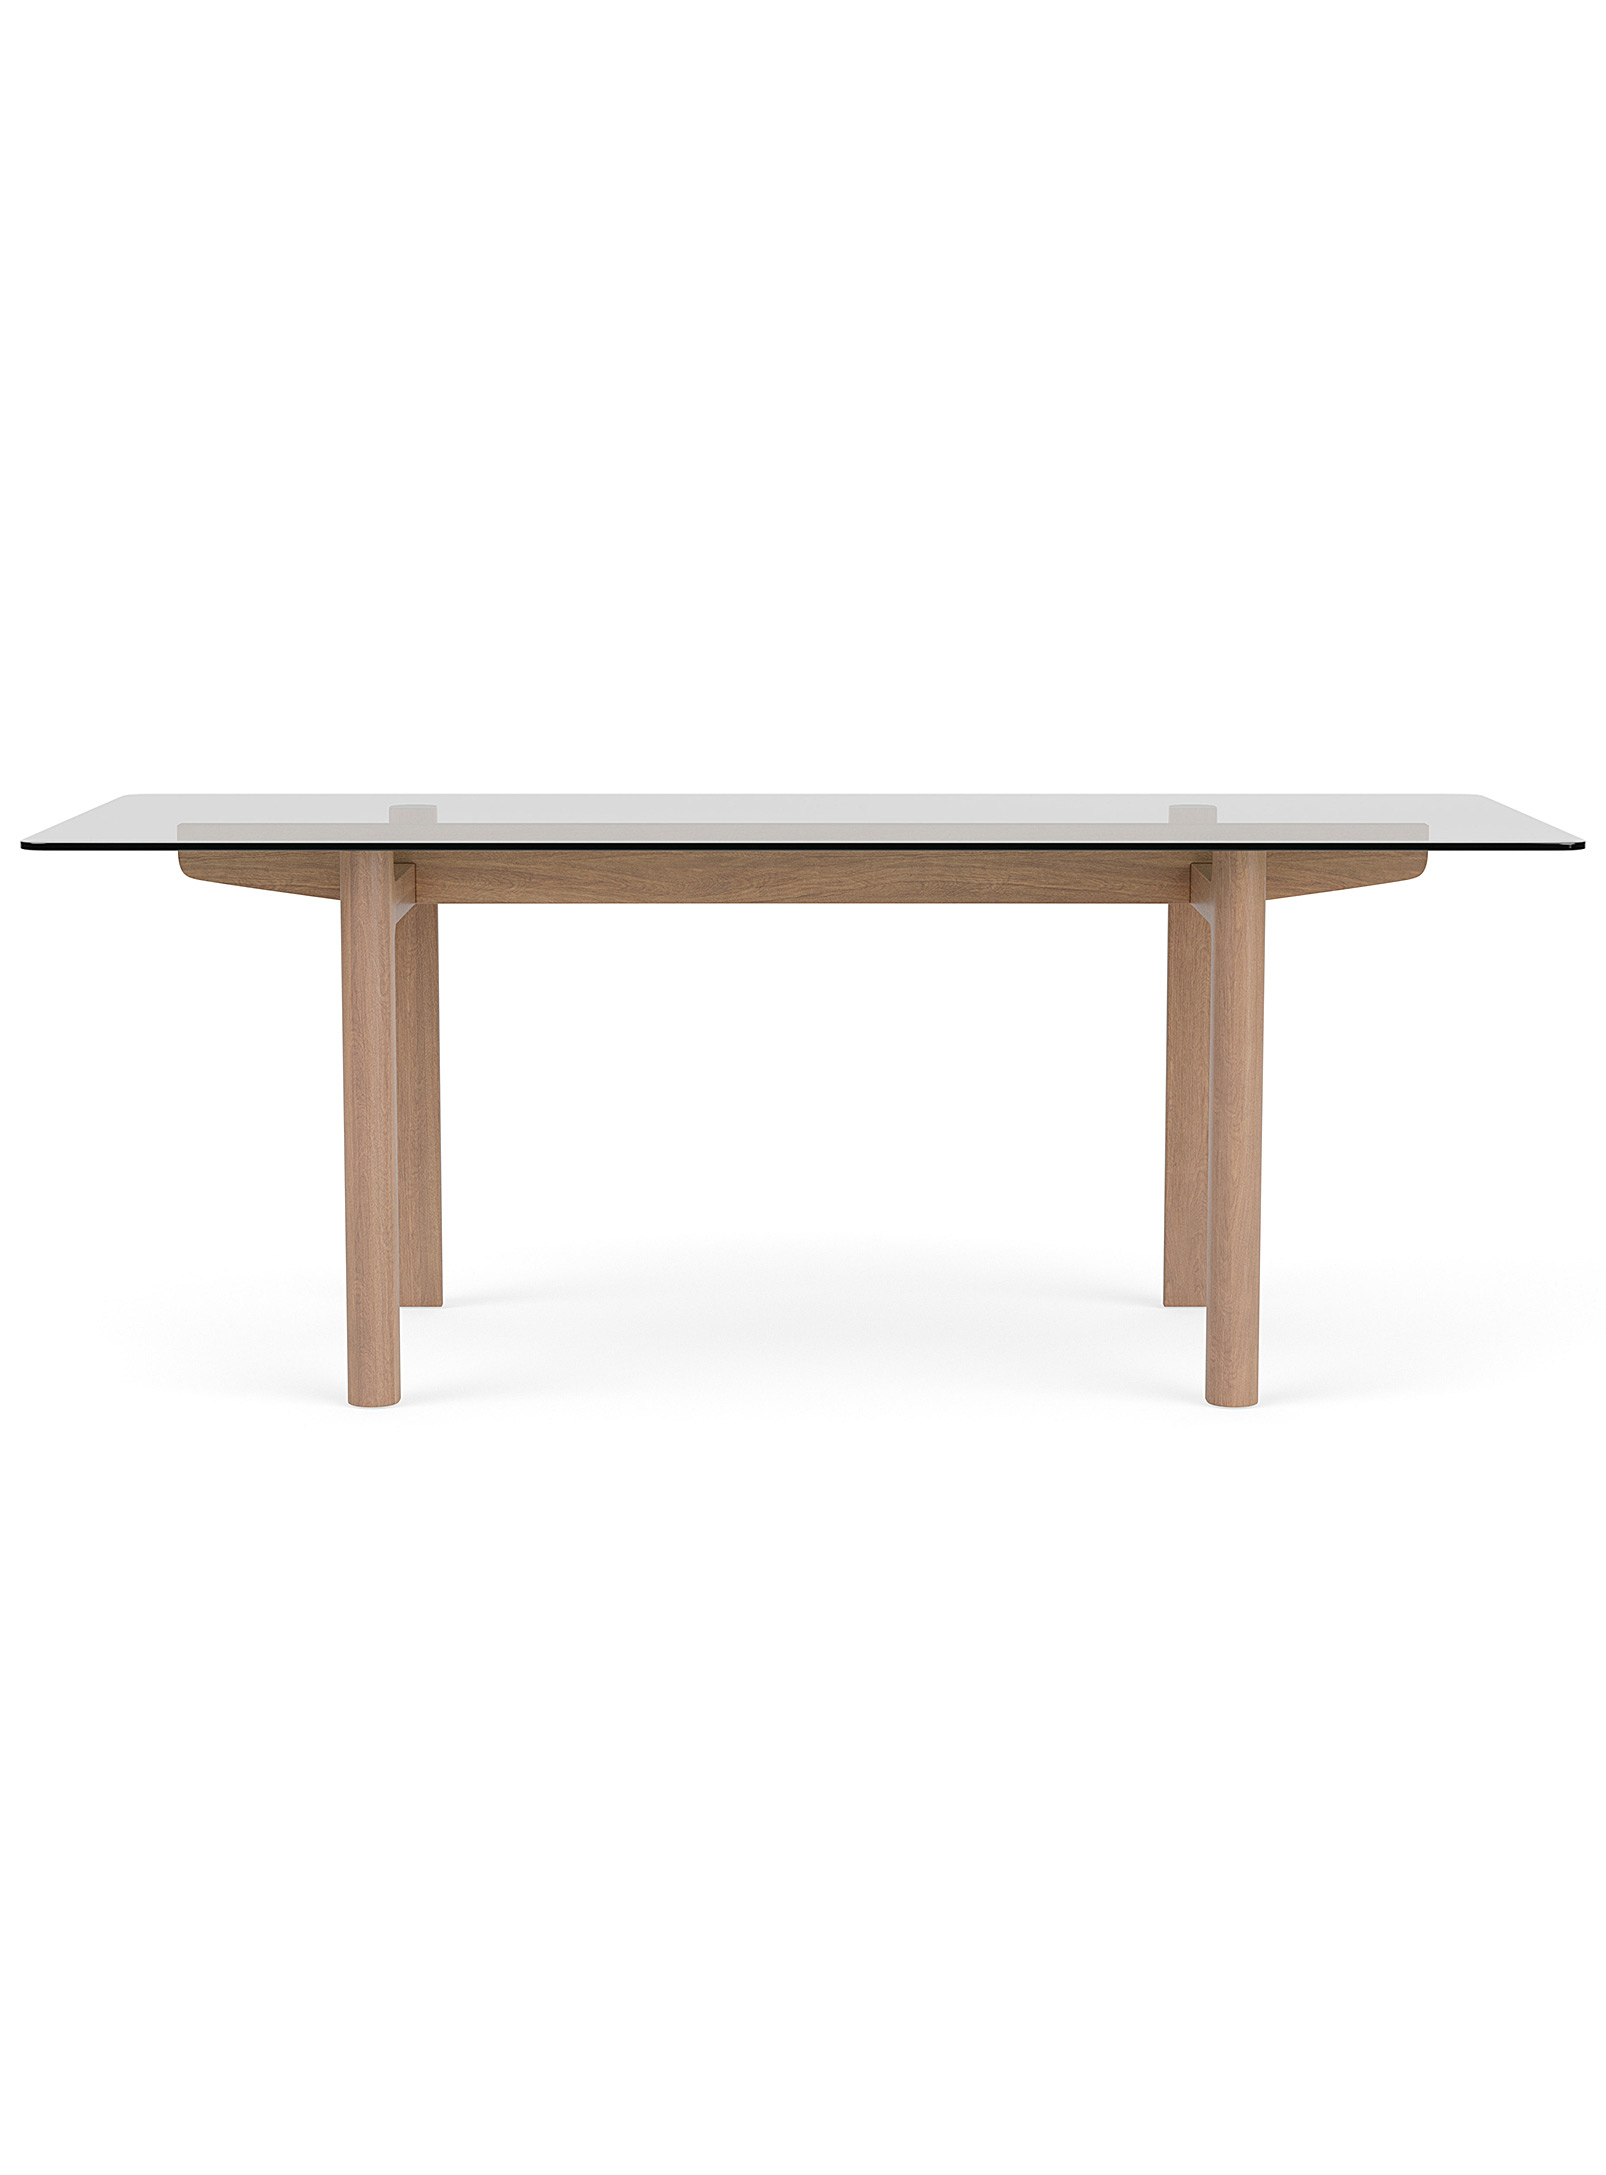 Eq3 Airy Architecture Dining Table Seats 6 To 8 People In Assorted